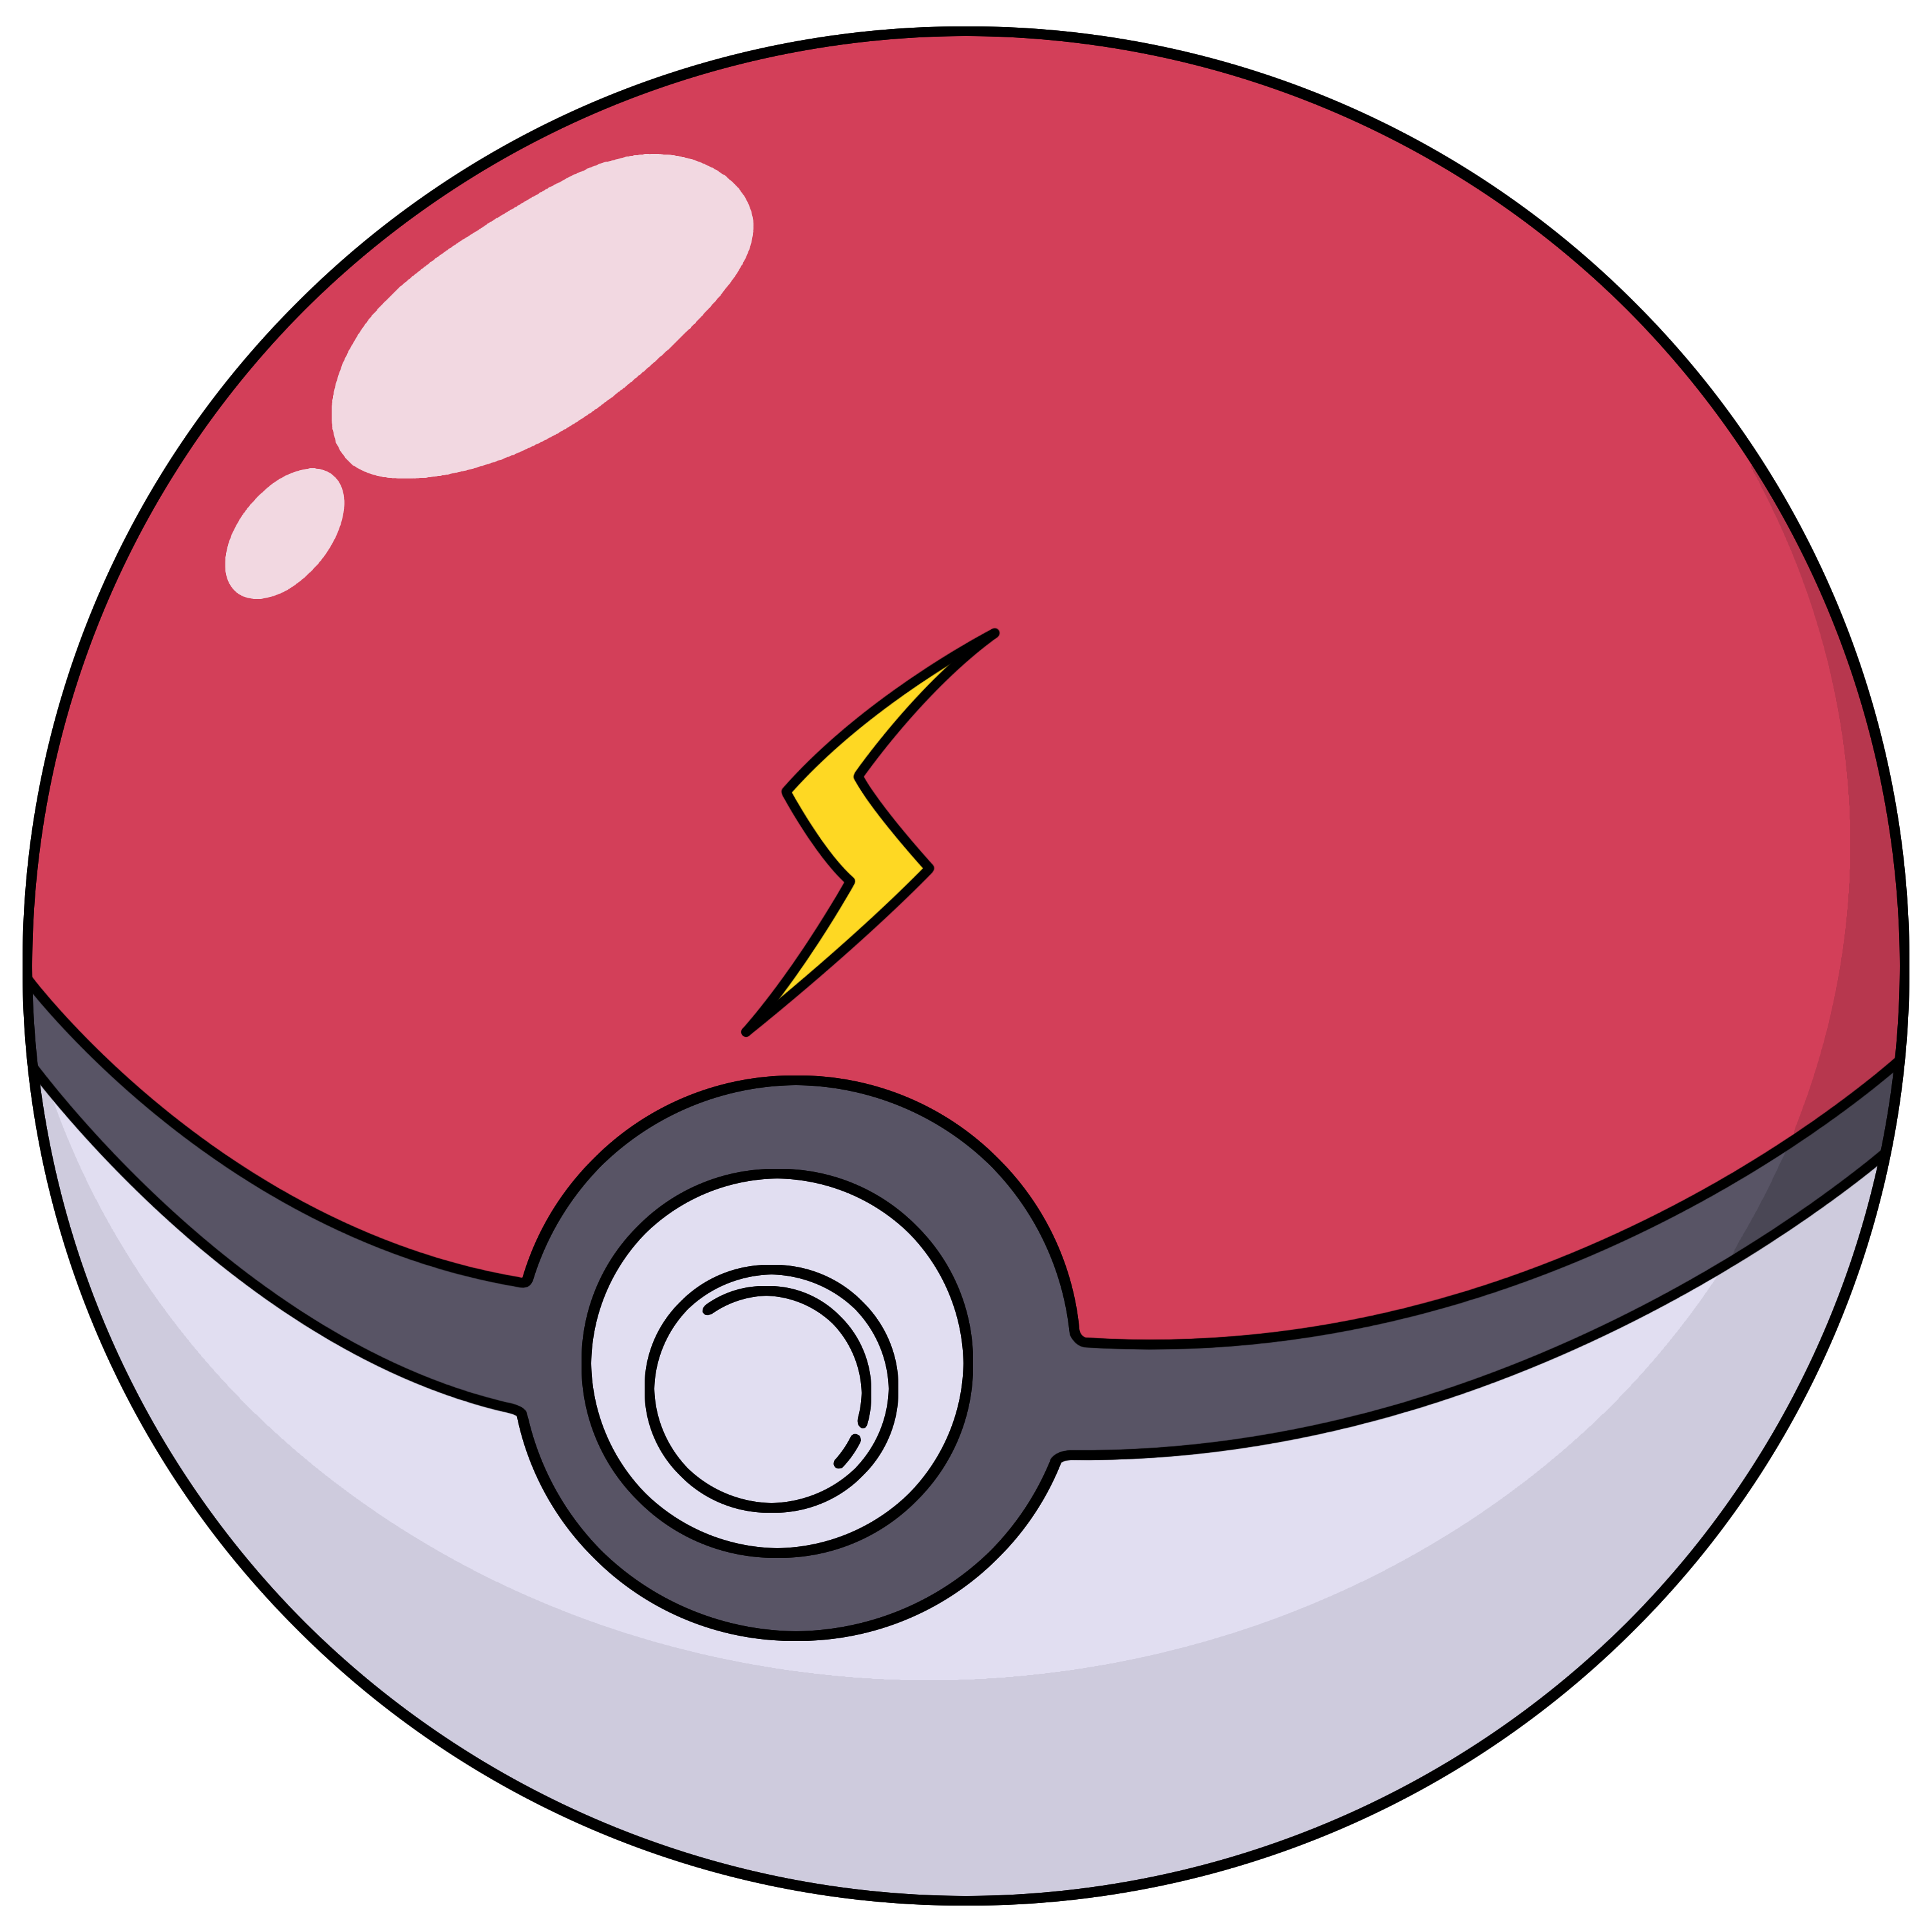 Pikachu Clipart Ball Pikachu Ball Transparent Free For Download On